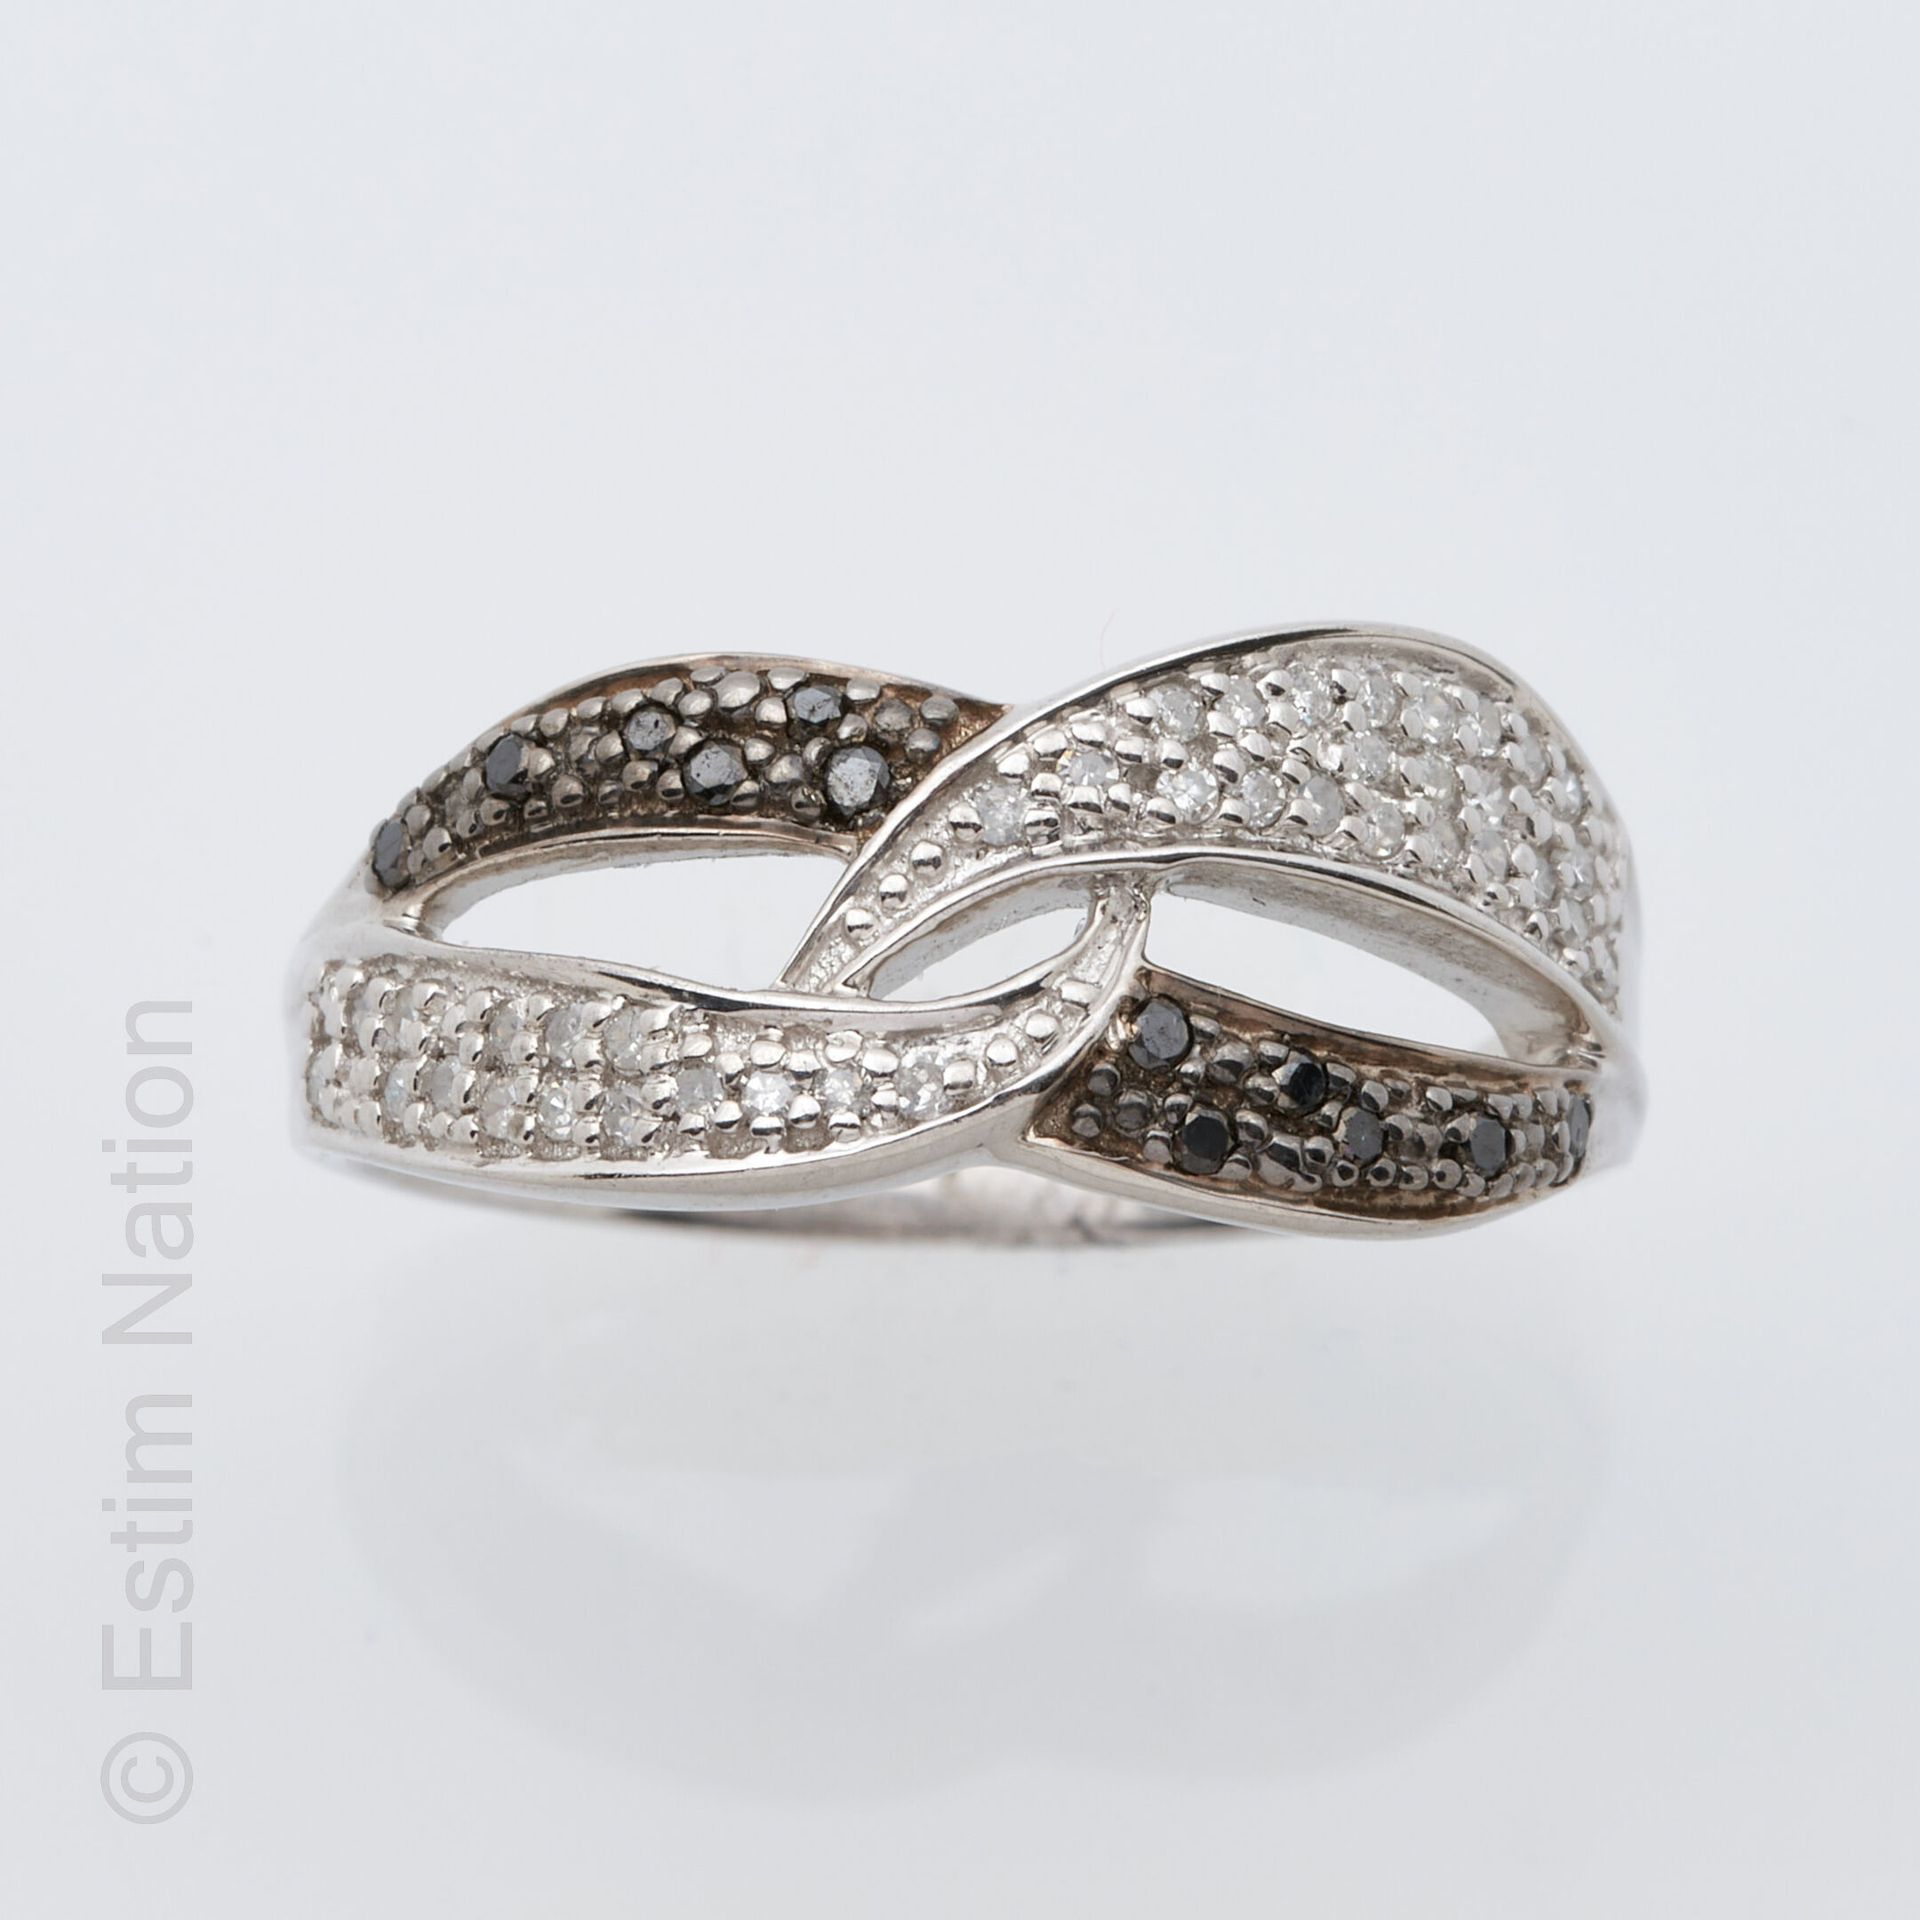 BAGUE ARGENT ET DIAMANTS Silver ring (925 thousandths) openwork with knotted pat&hellip;